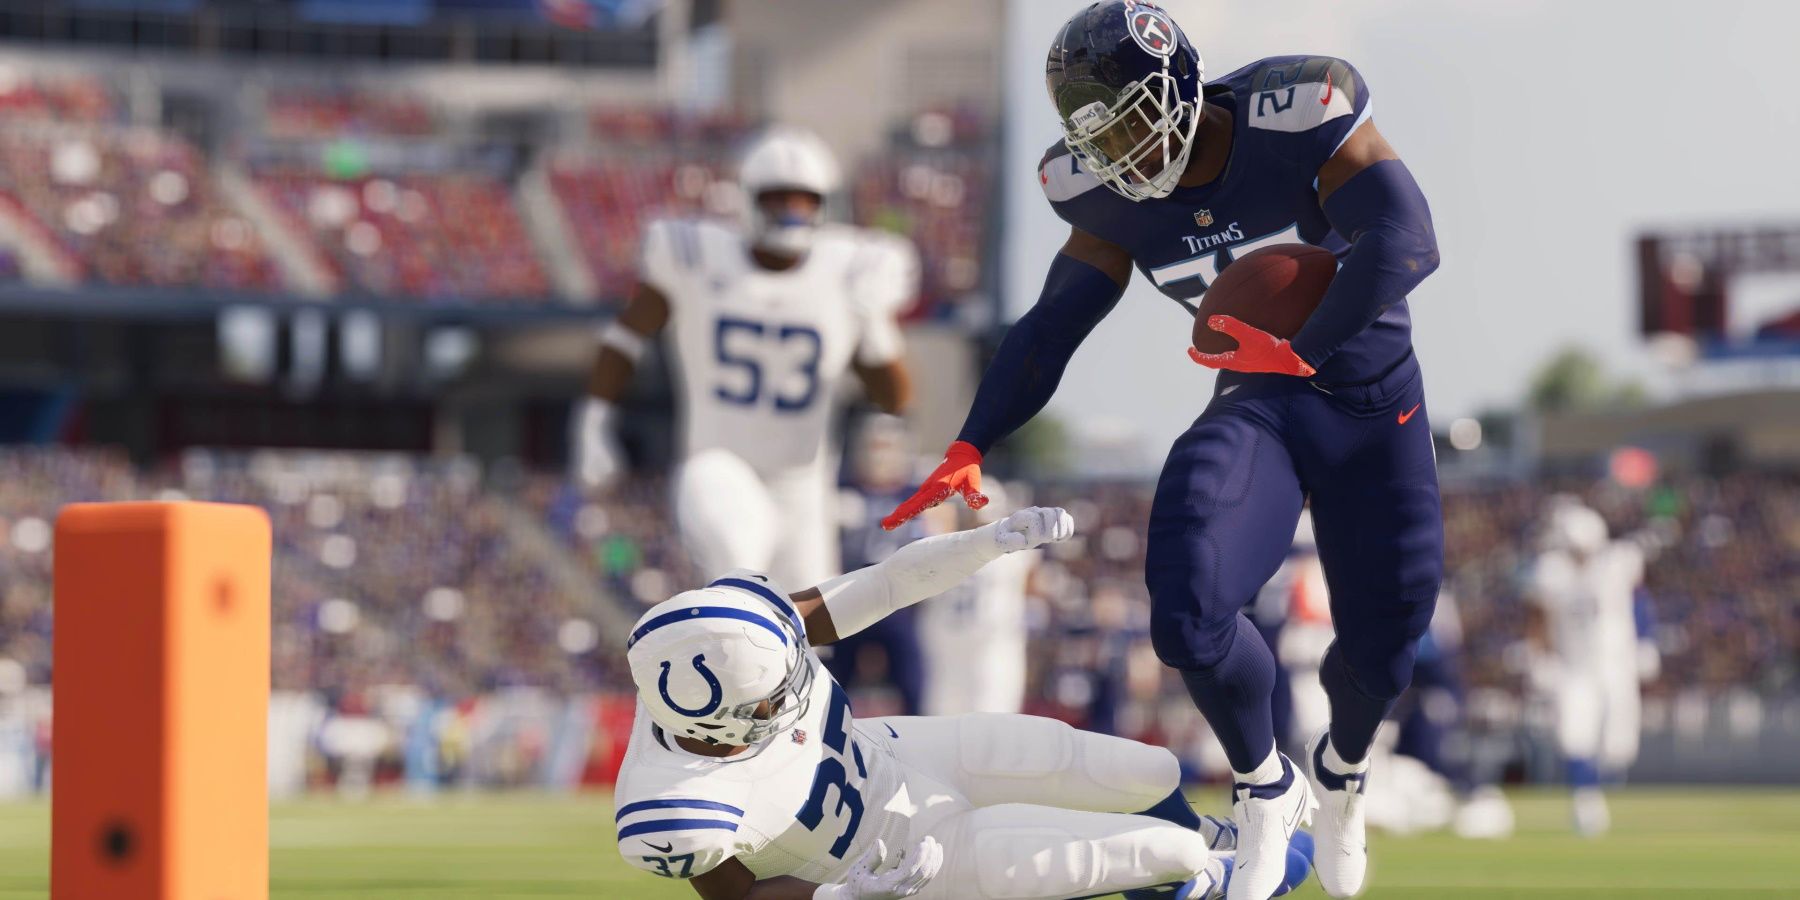 Madden NFL 23 Update Could Be Delayed By Hurricane
Ian